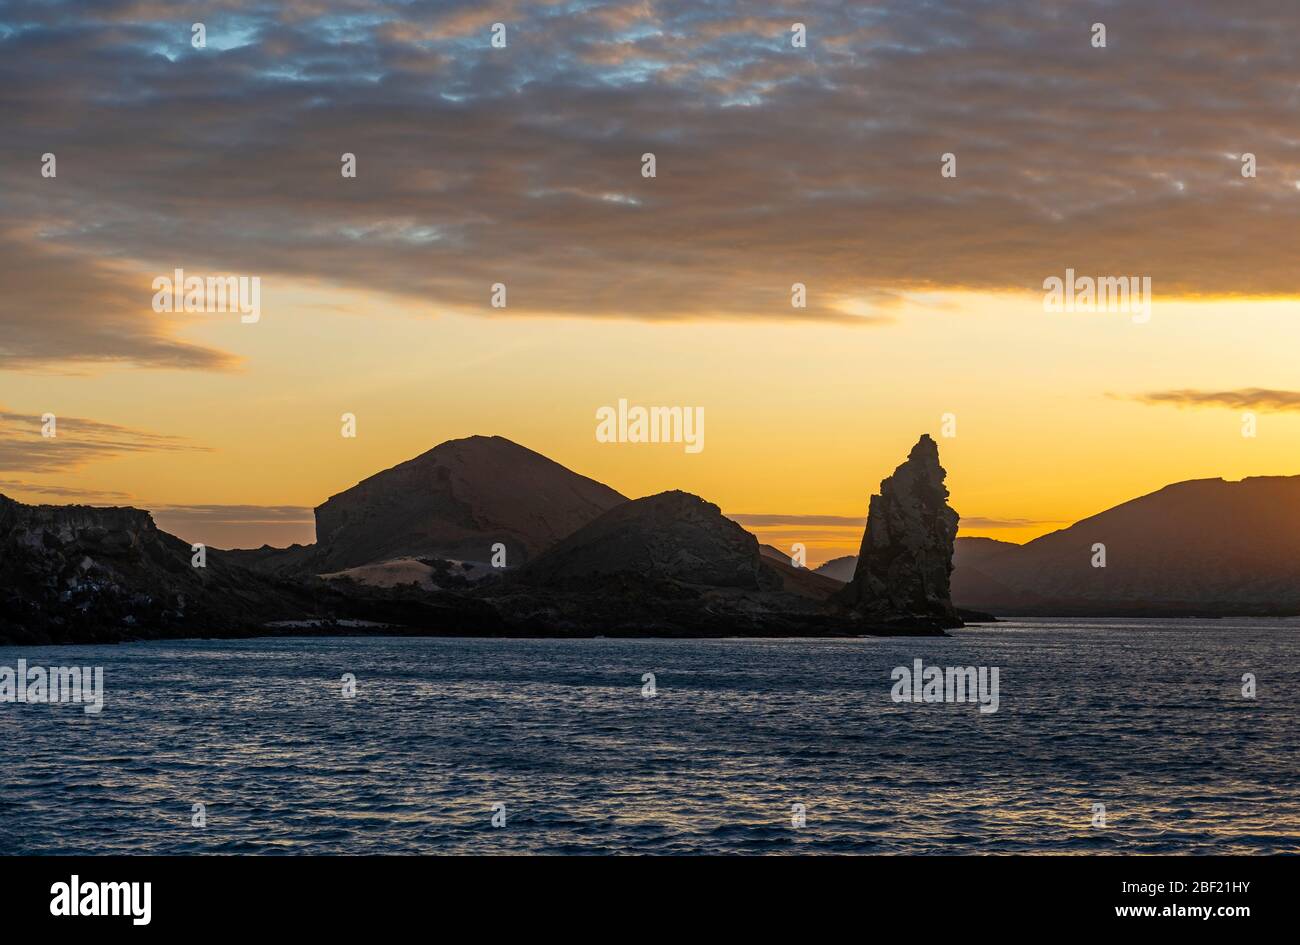 Silhouette of the Pinnacle Rock formation on Bartolome Island at sunset, Galapagos national park, Ecuador. Stock Photo